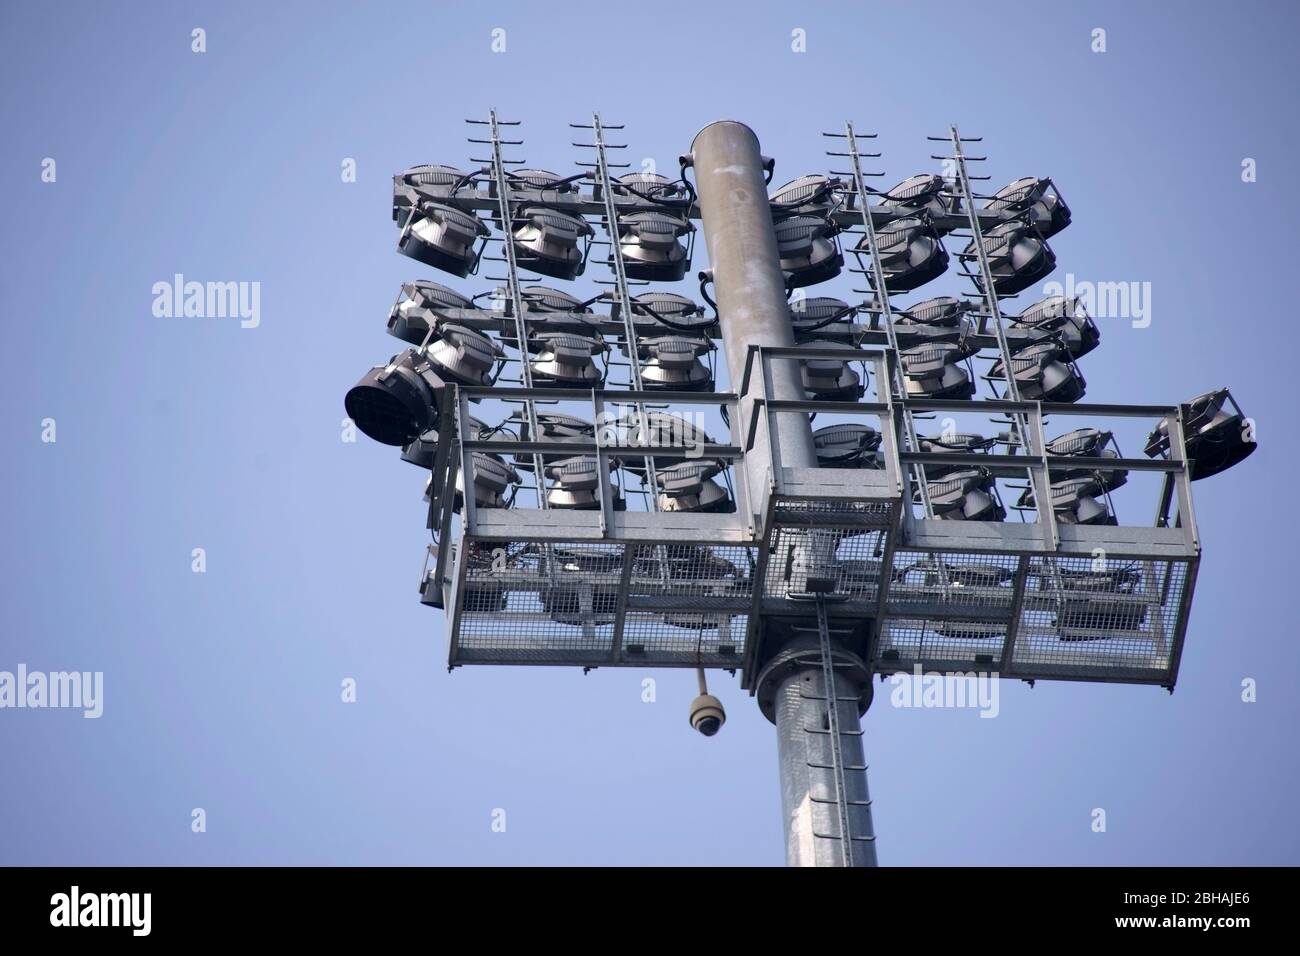 The stadium floodlight of a large football stadium with many small lamps and in front of a blue sky with clouds. Stock Photo